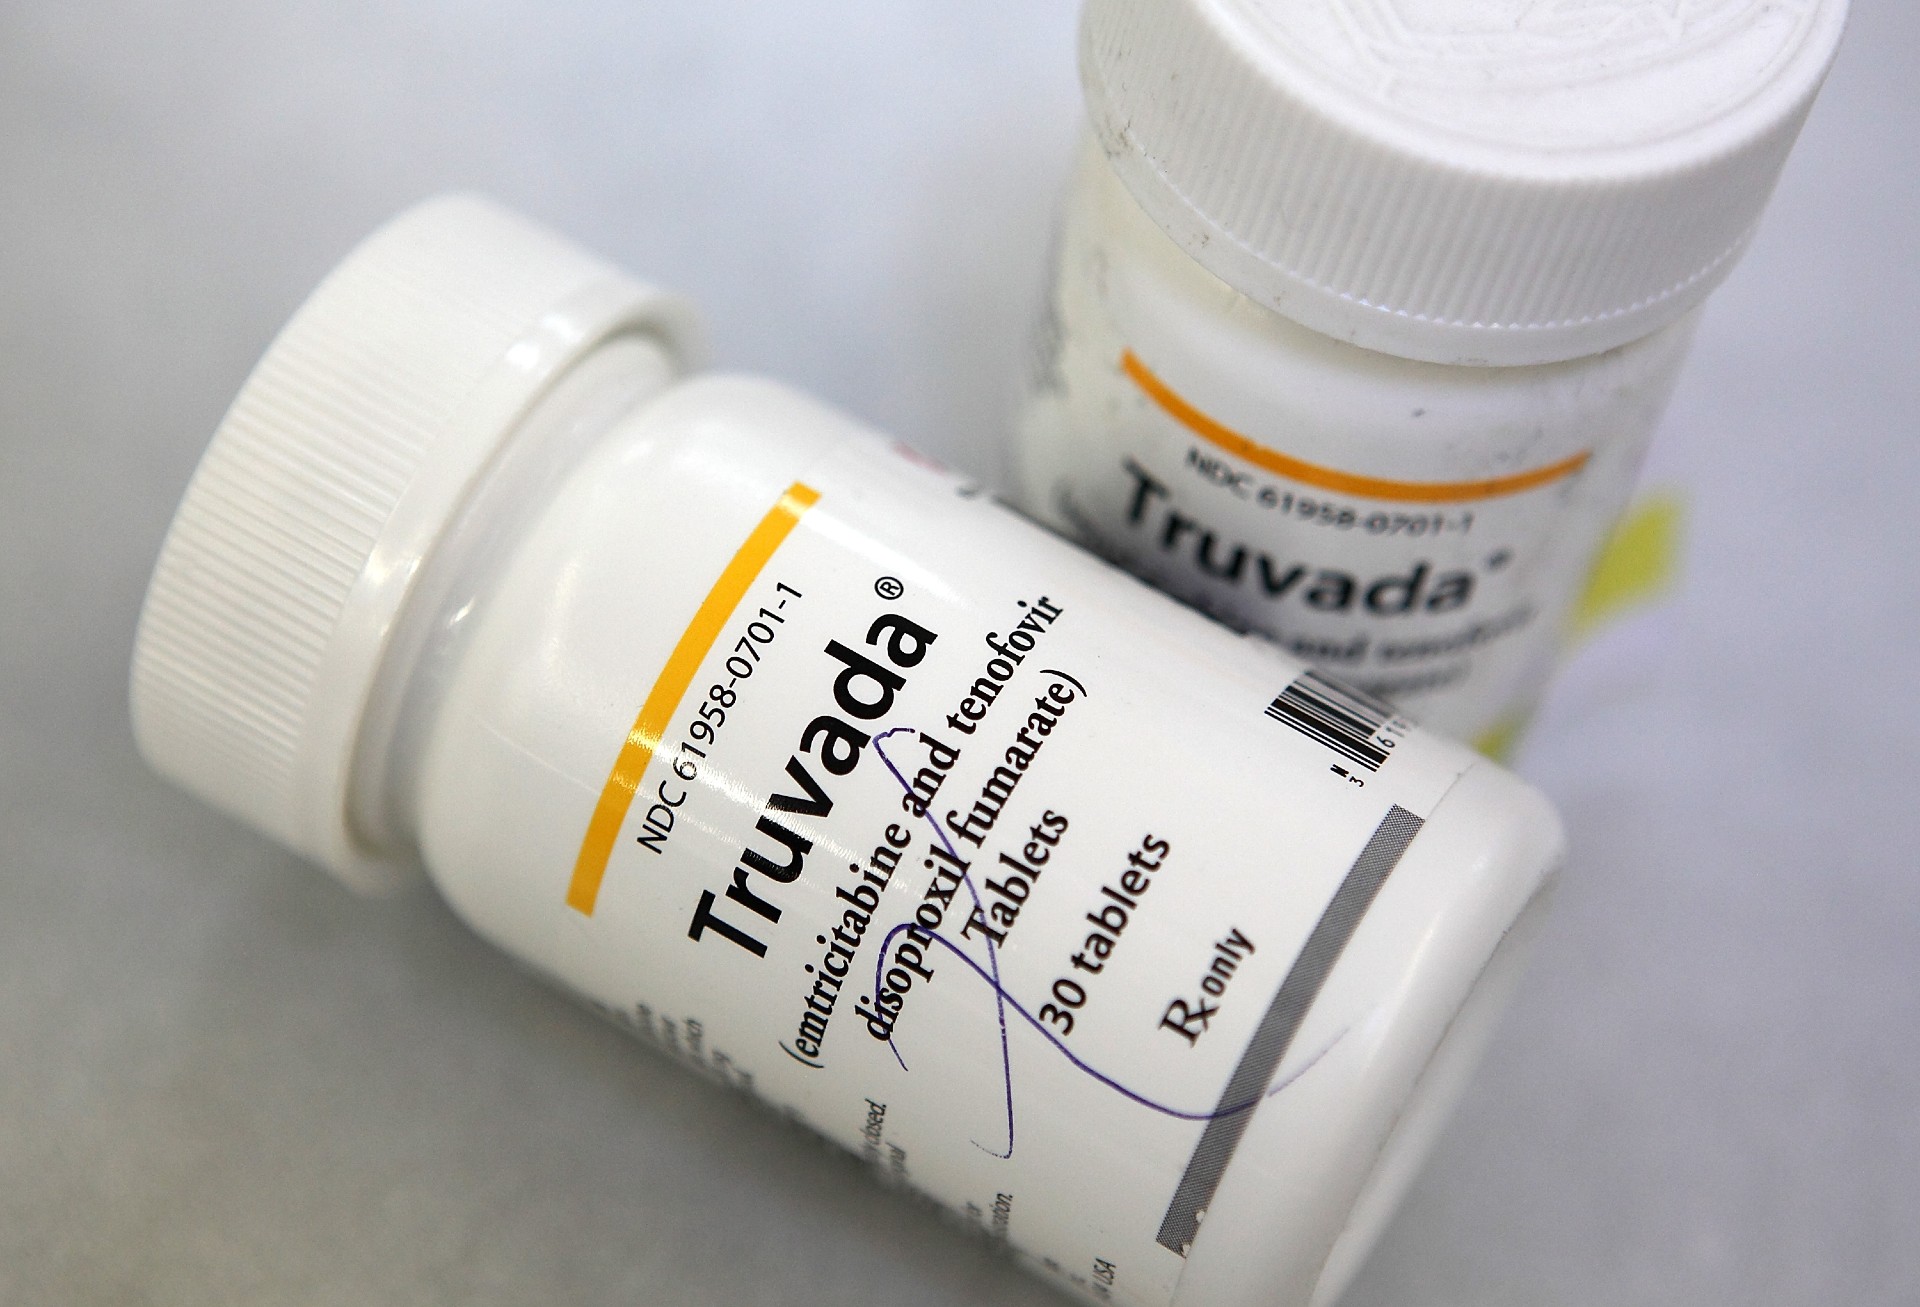 Two medicine bottles with Truvada on the label